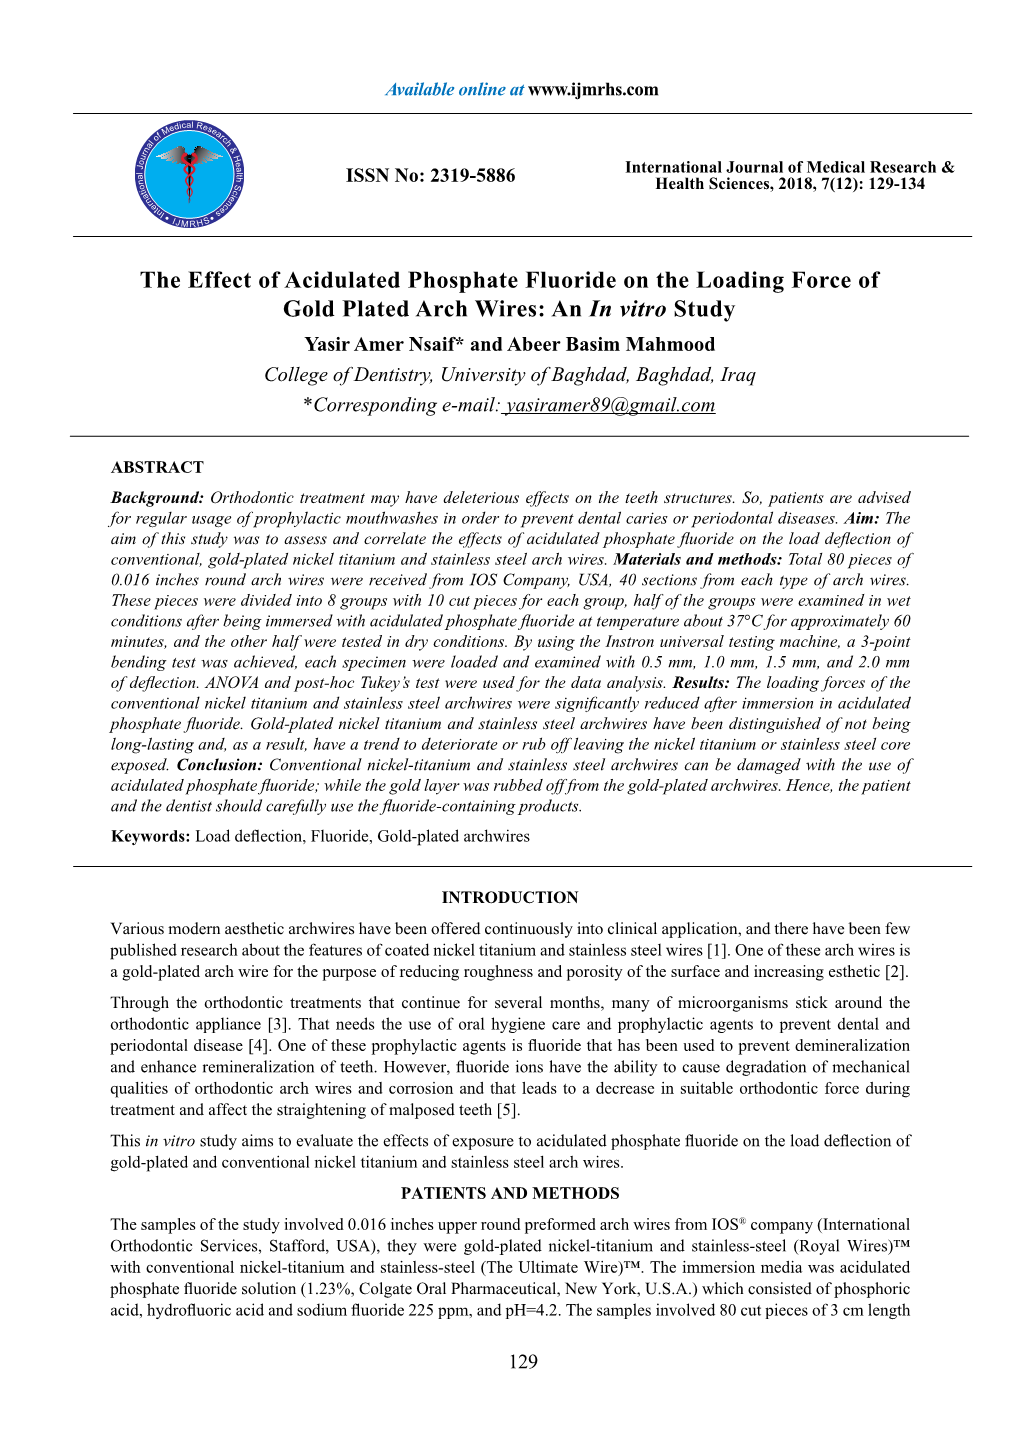 The Effect of Acidulated Phosphate Fluoride on the Loading Force Of